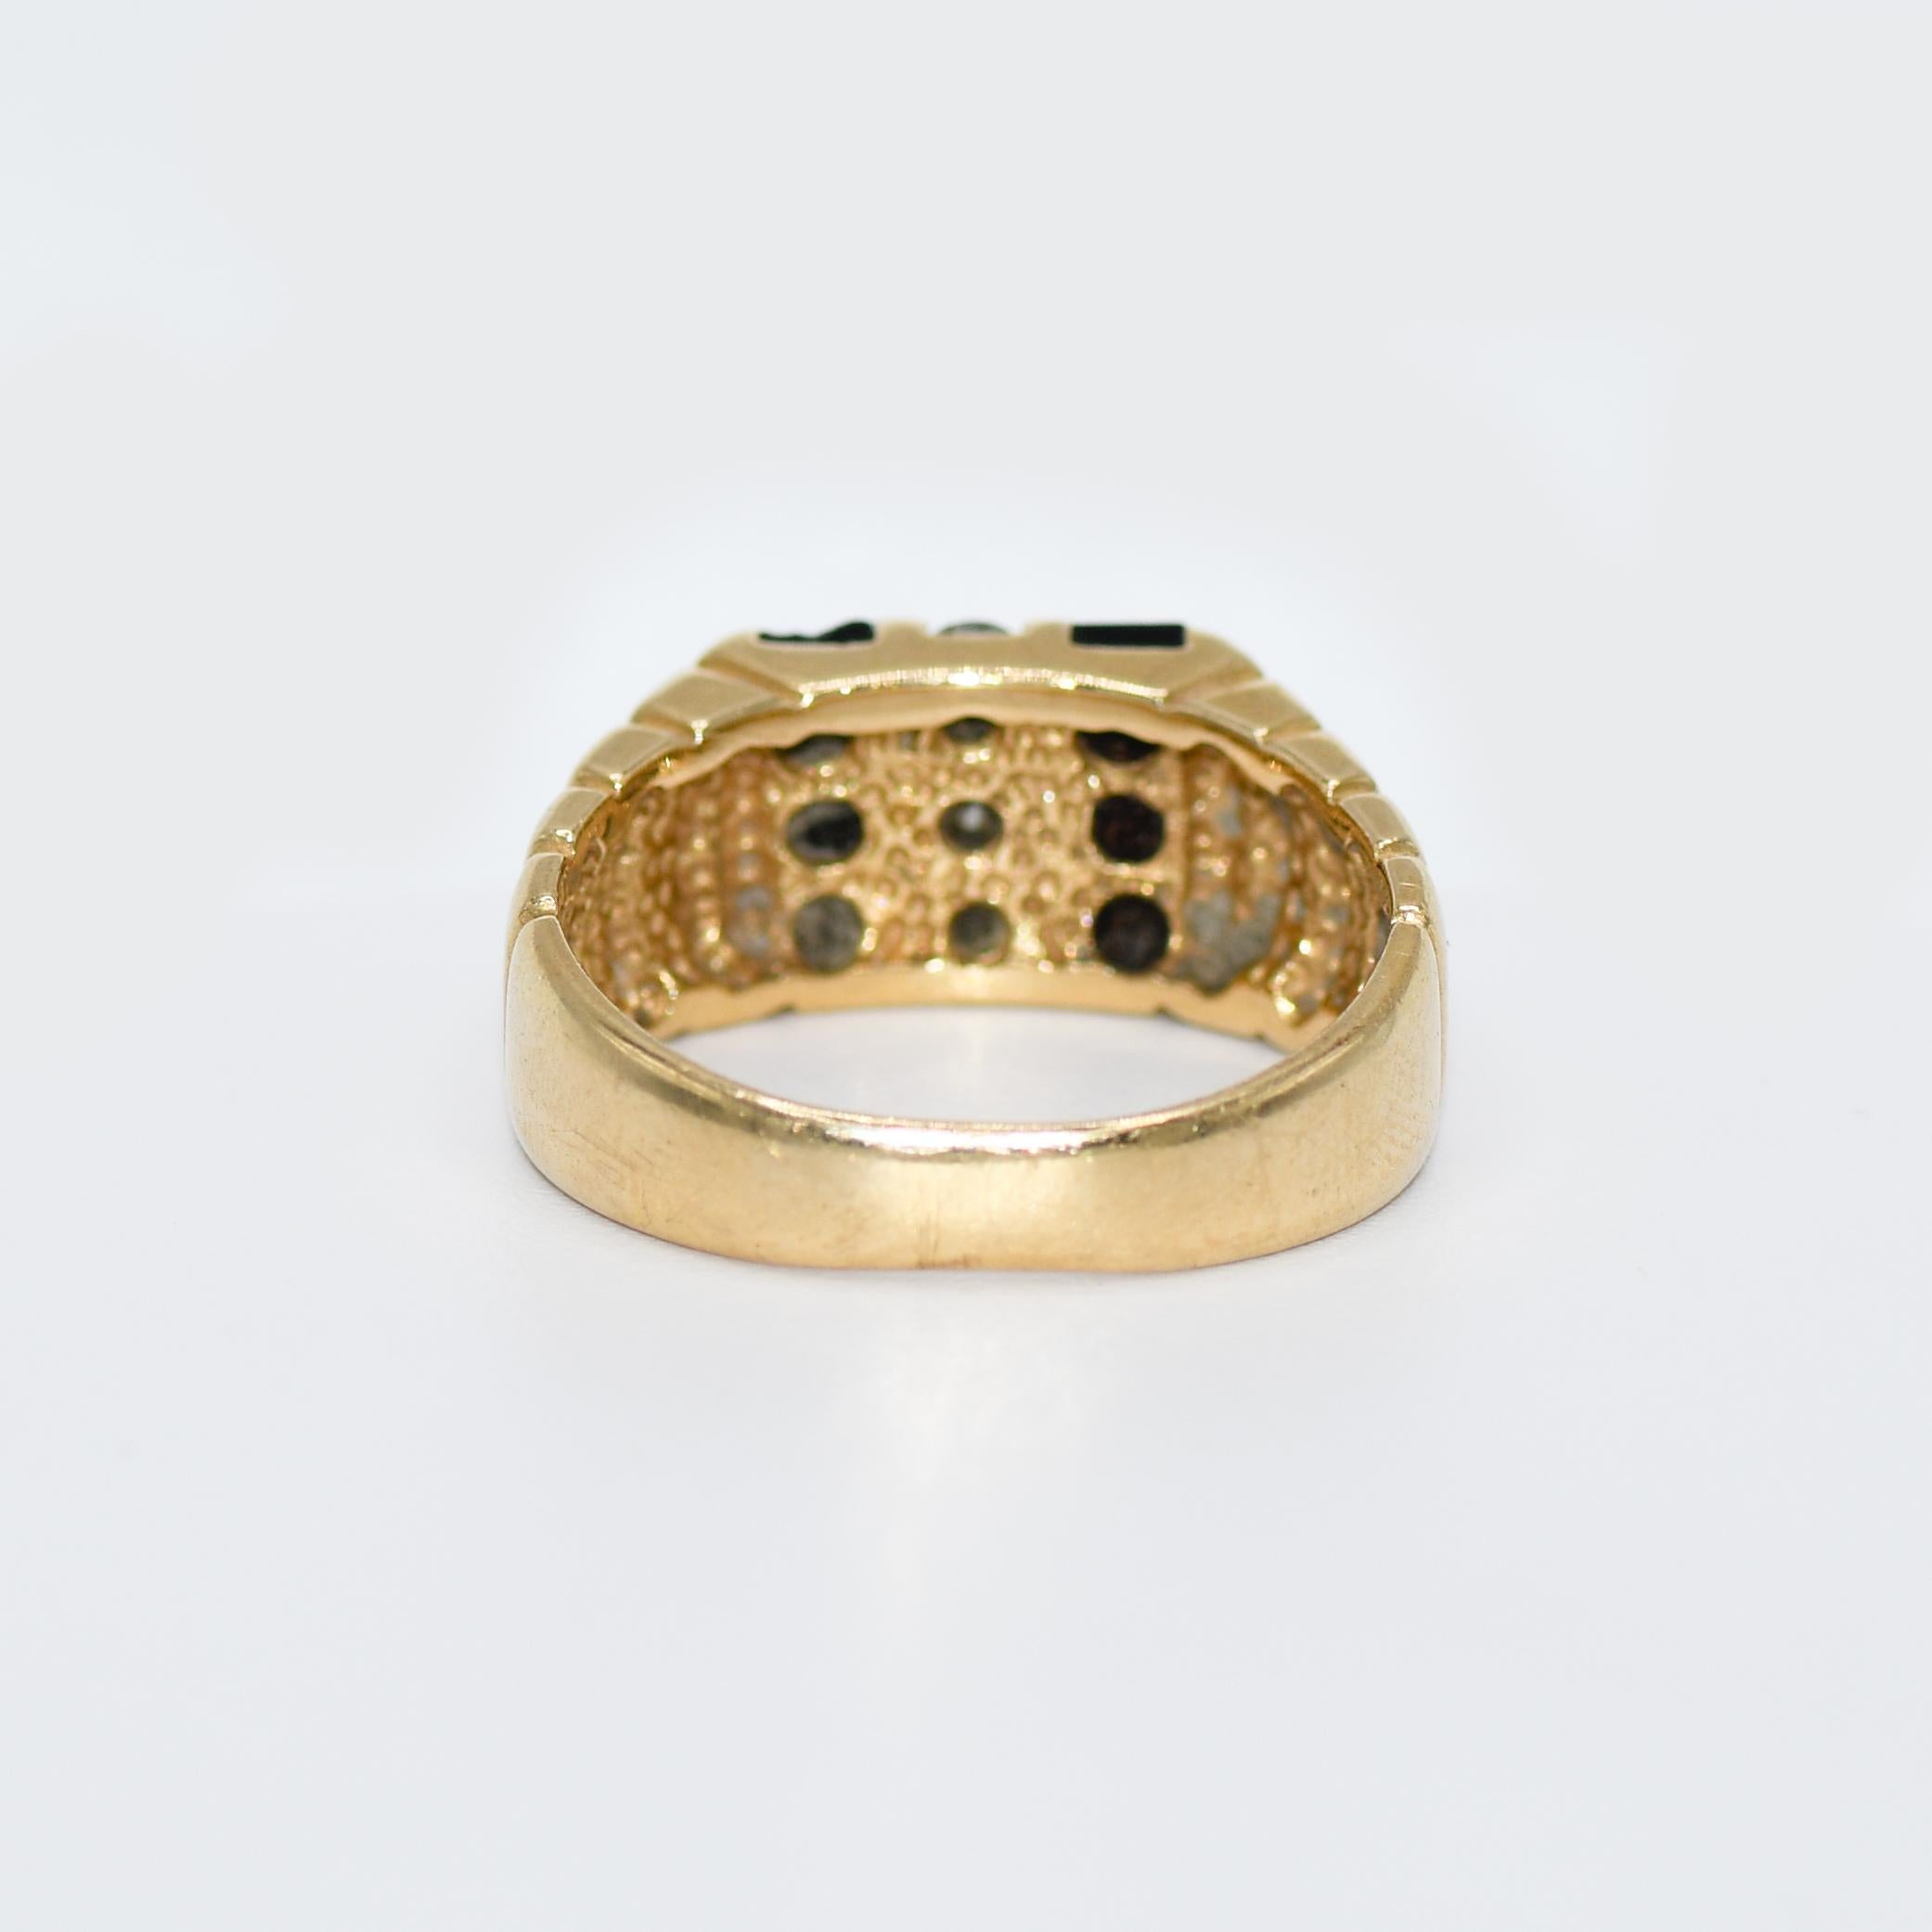 14K Yellow Gold Diamond & Onyx Ring, 7.5gr, .25TDW In Excellent Condition For Sale In Laguna Beach, CA